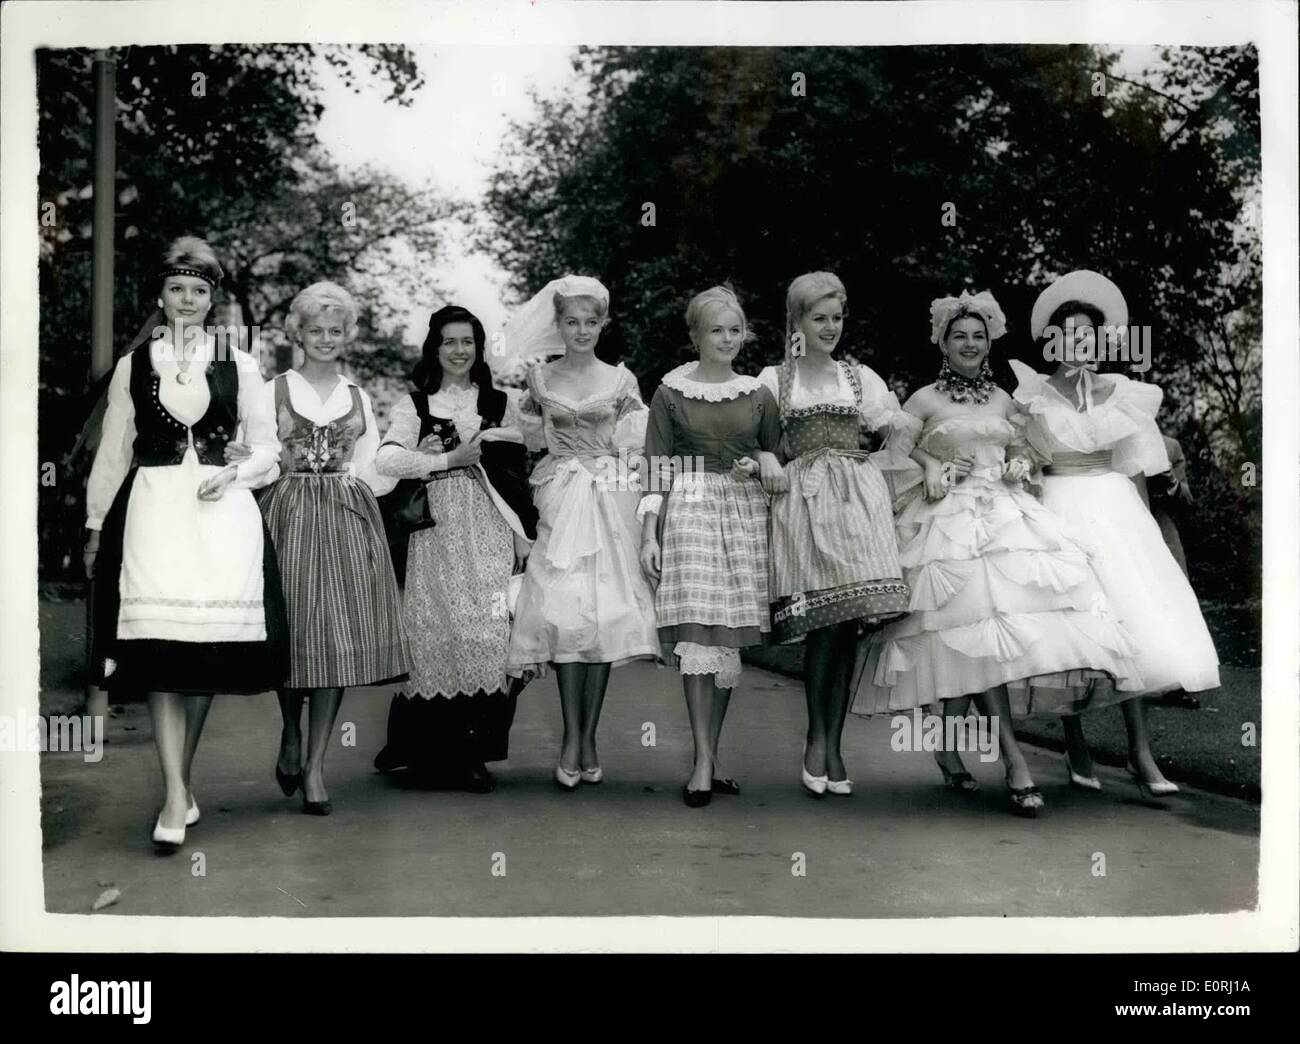 Nov. 11, 1959 - Miss world contestants visit house of commons. Contestants in next week's ''Miss World'' contest, wearing National costumes, today went to the house of commons for a conducted tour. Photo shows Miss World contestants in national costume, pictures leaving the Savoy Hotel for the horse of Commons today. They are (L to R) : Miss Finland (Margit Jaatineh); Miss Sweden (Carola Hakansson); Miss Iceland (Sigurbjorg Sveinadottir); Miss Germany (Helga Meyer); Miss Denmark (Kirsten Olsen); Miss Austria (Helga Knofel); Miss Brazil (Dione Olivaira), and Miss South Africa (Moya Meaker) Stock Photo